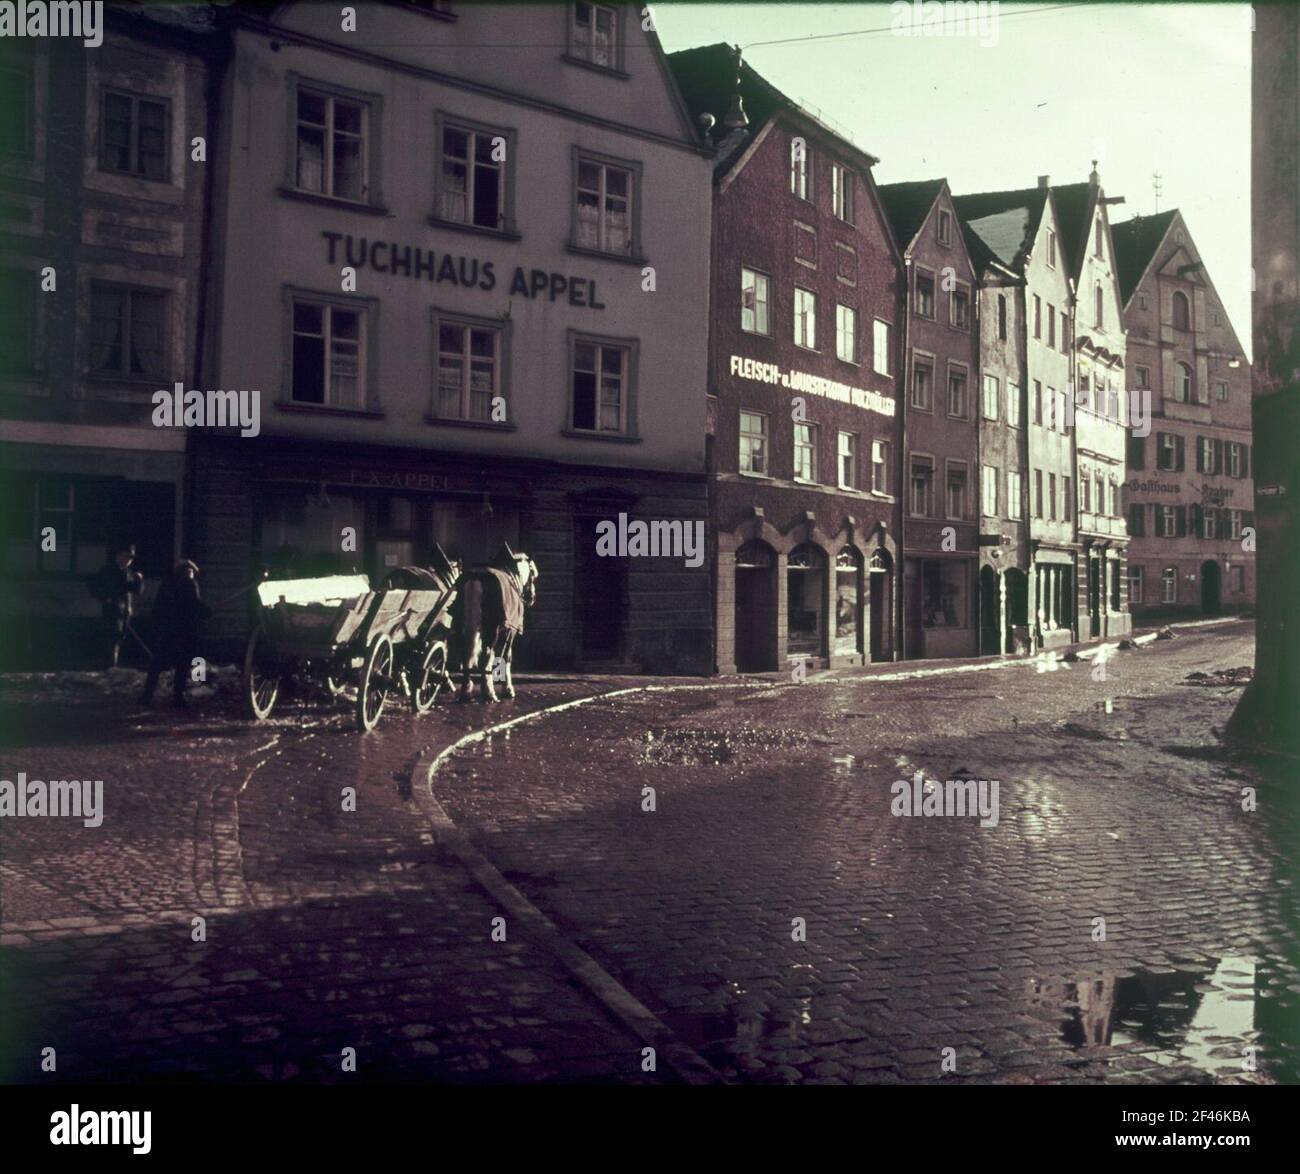 Tuchhaus High Resolution Stock Photography and Images - Alamy